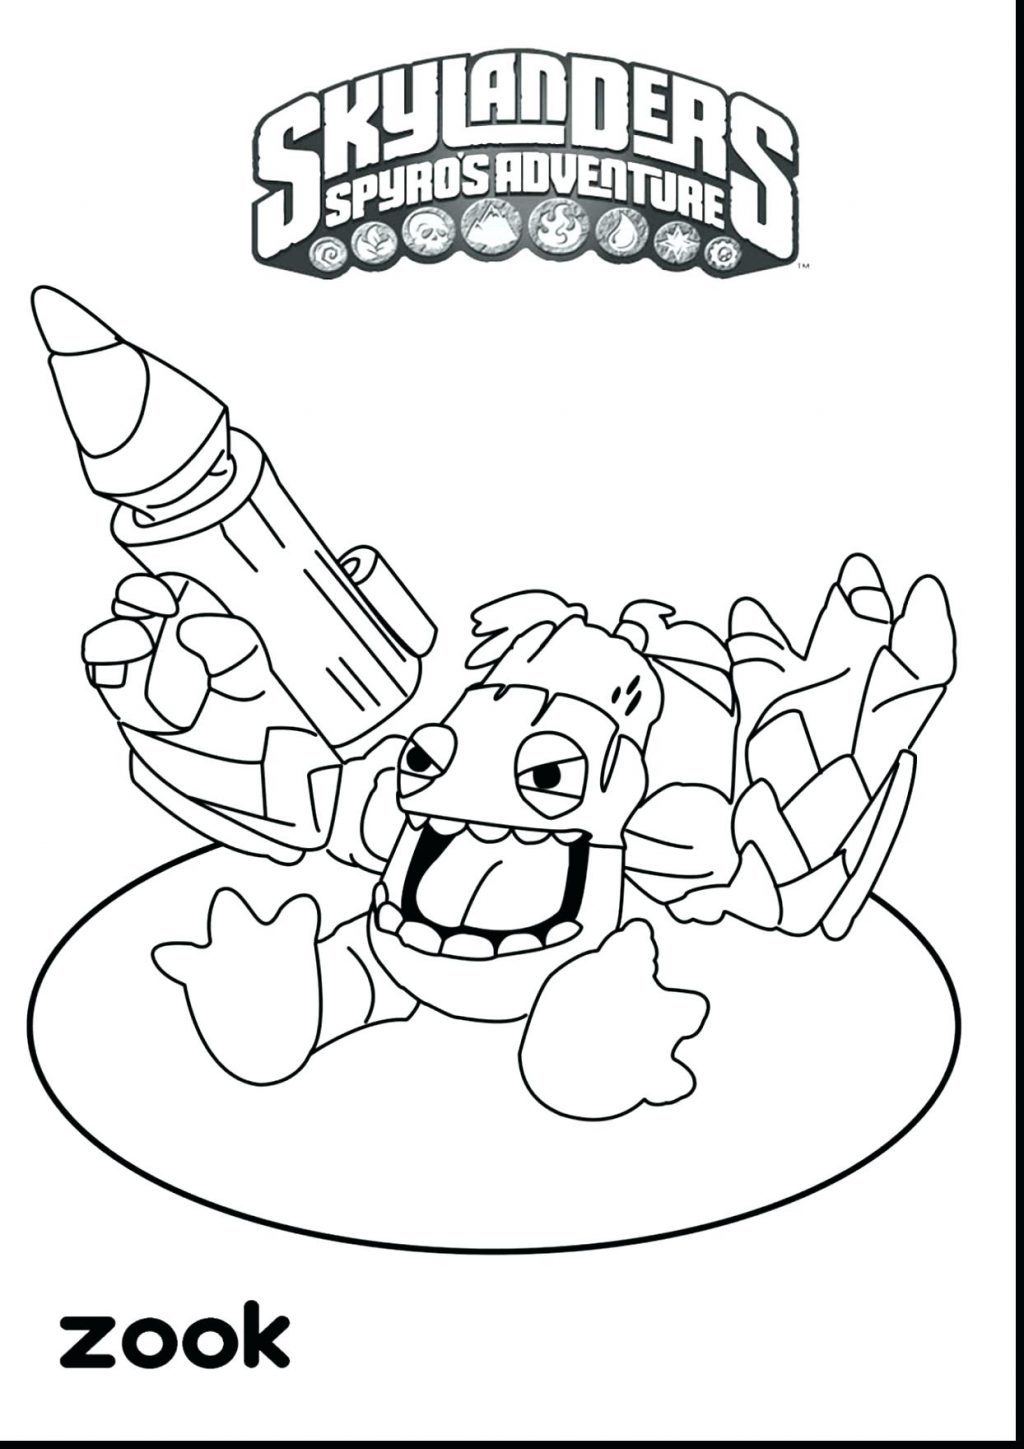 Plate Coloring Page Coloring Page Amazing Coolestg Pages Ever Image Ideas Page Cool